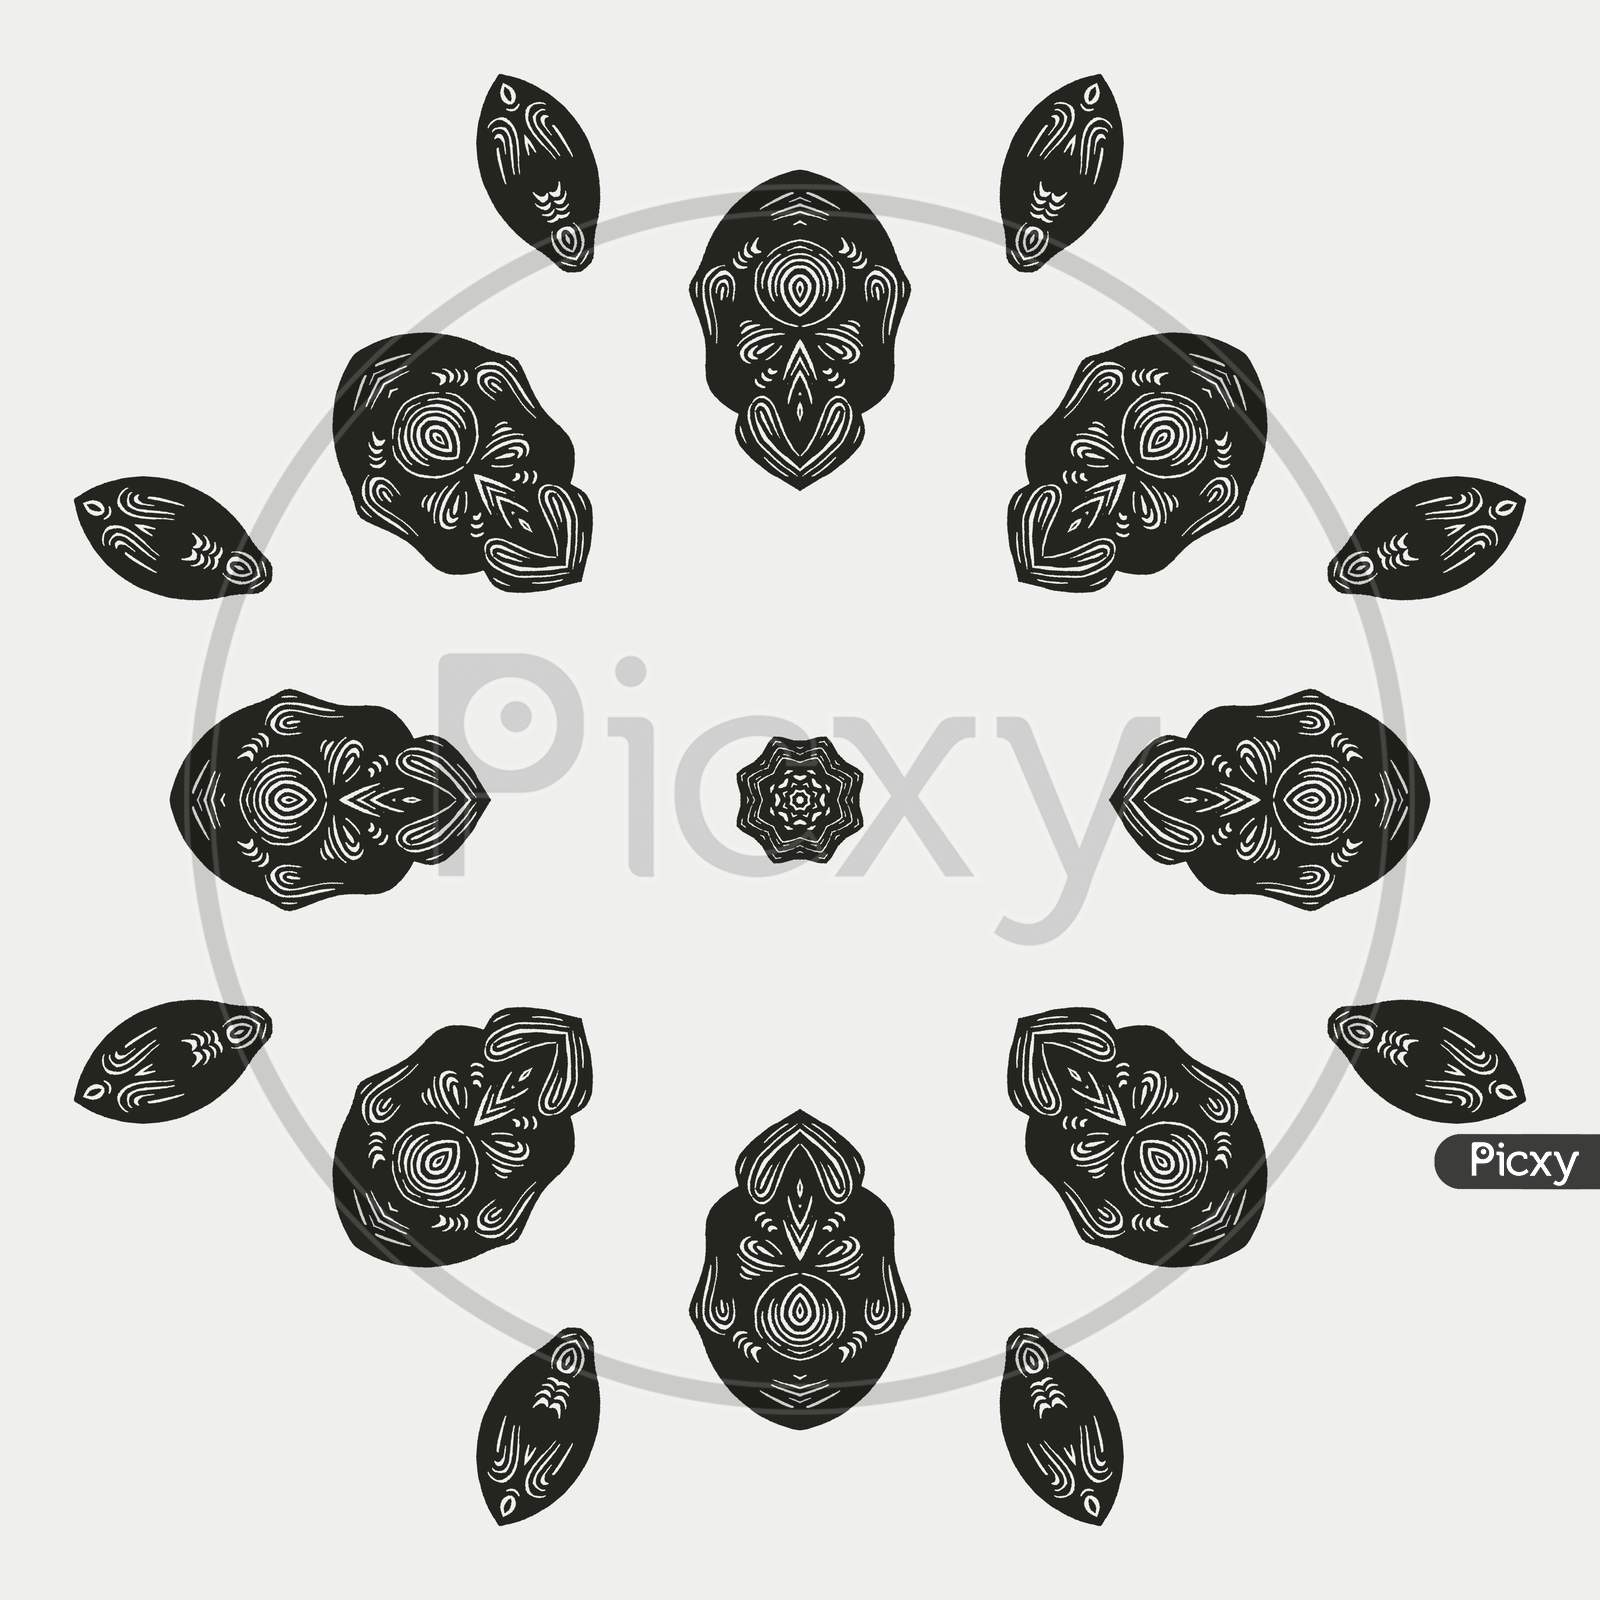 Beautiful And Elegant Monochromatic Symmetrical Mandala Designs On Solid Sheet Of Wallpaper. Concept Of Home Decor And Interior Designing.